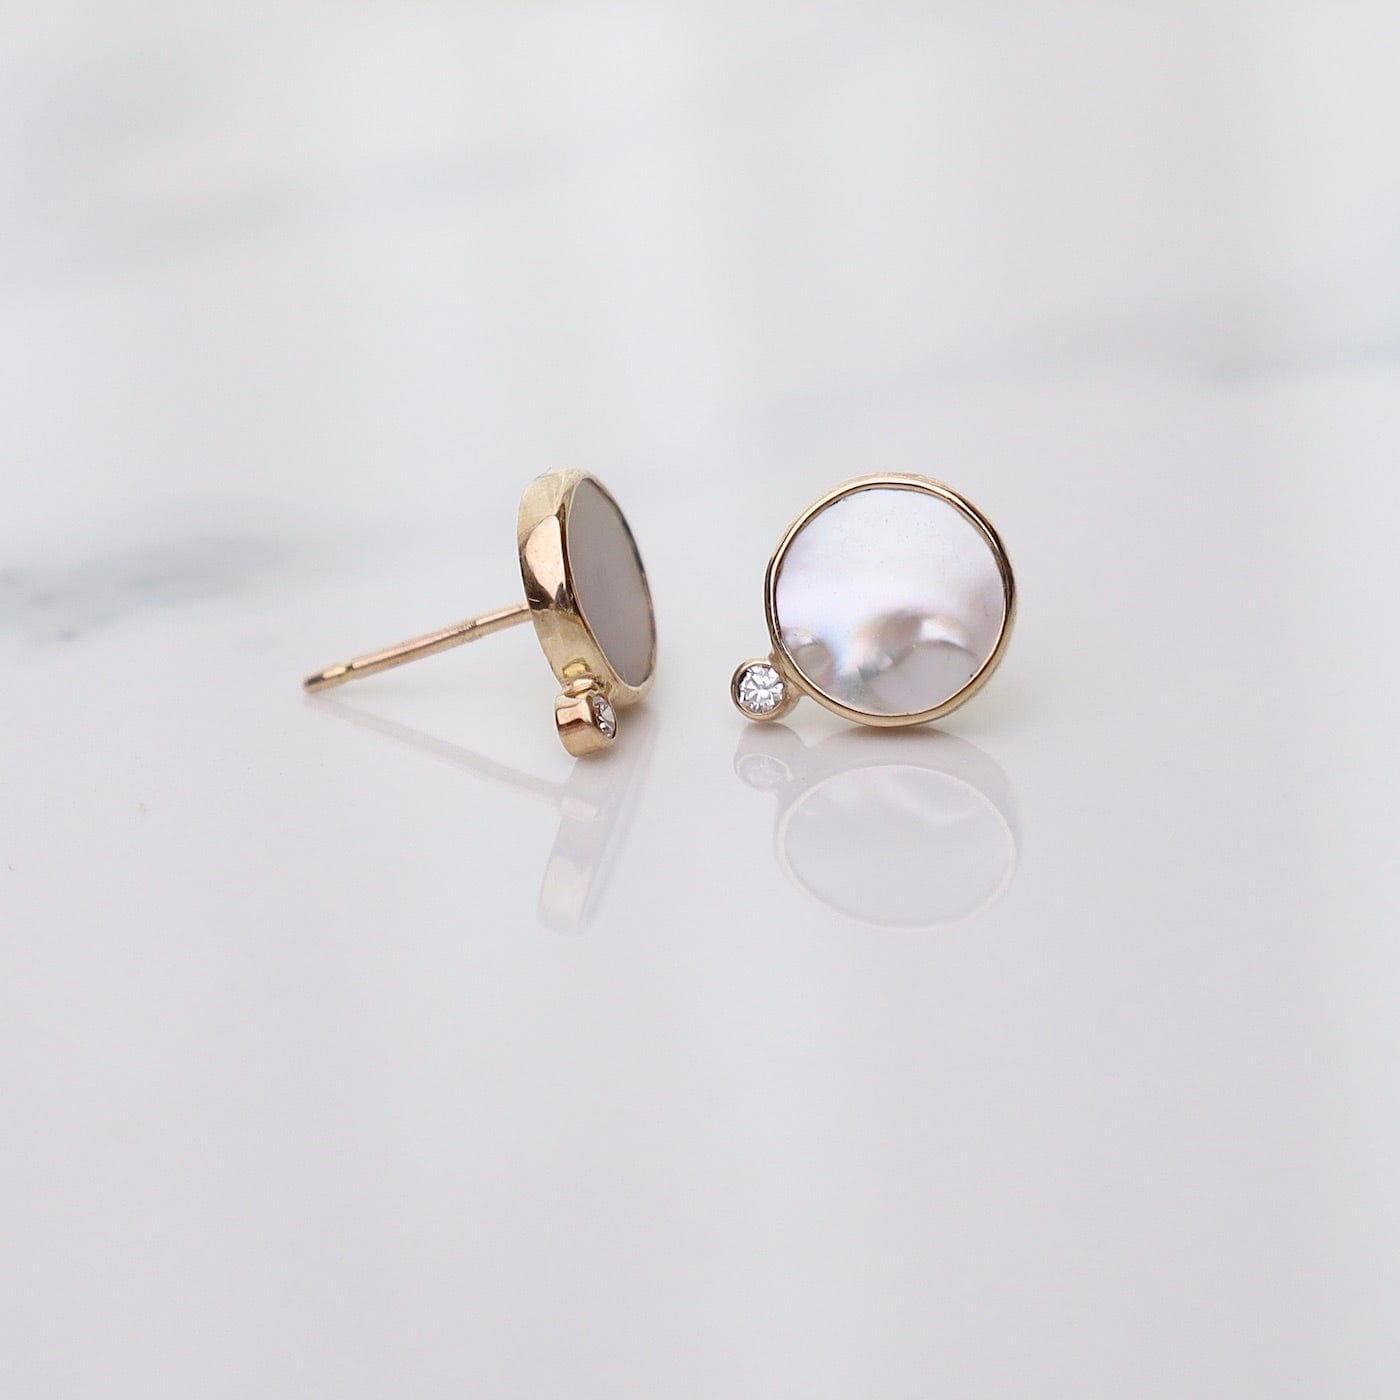 Mini Medallion Earring Studs in Yellow, Rose or White Gold